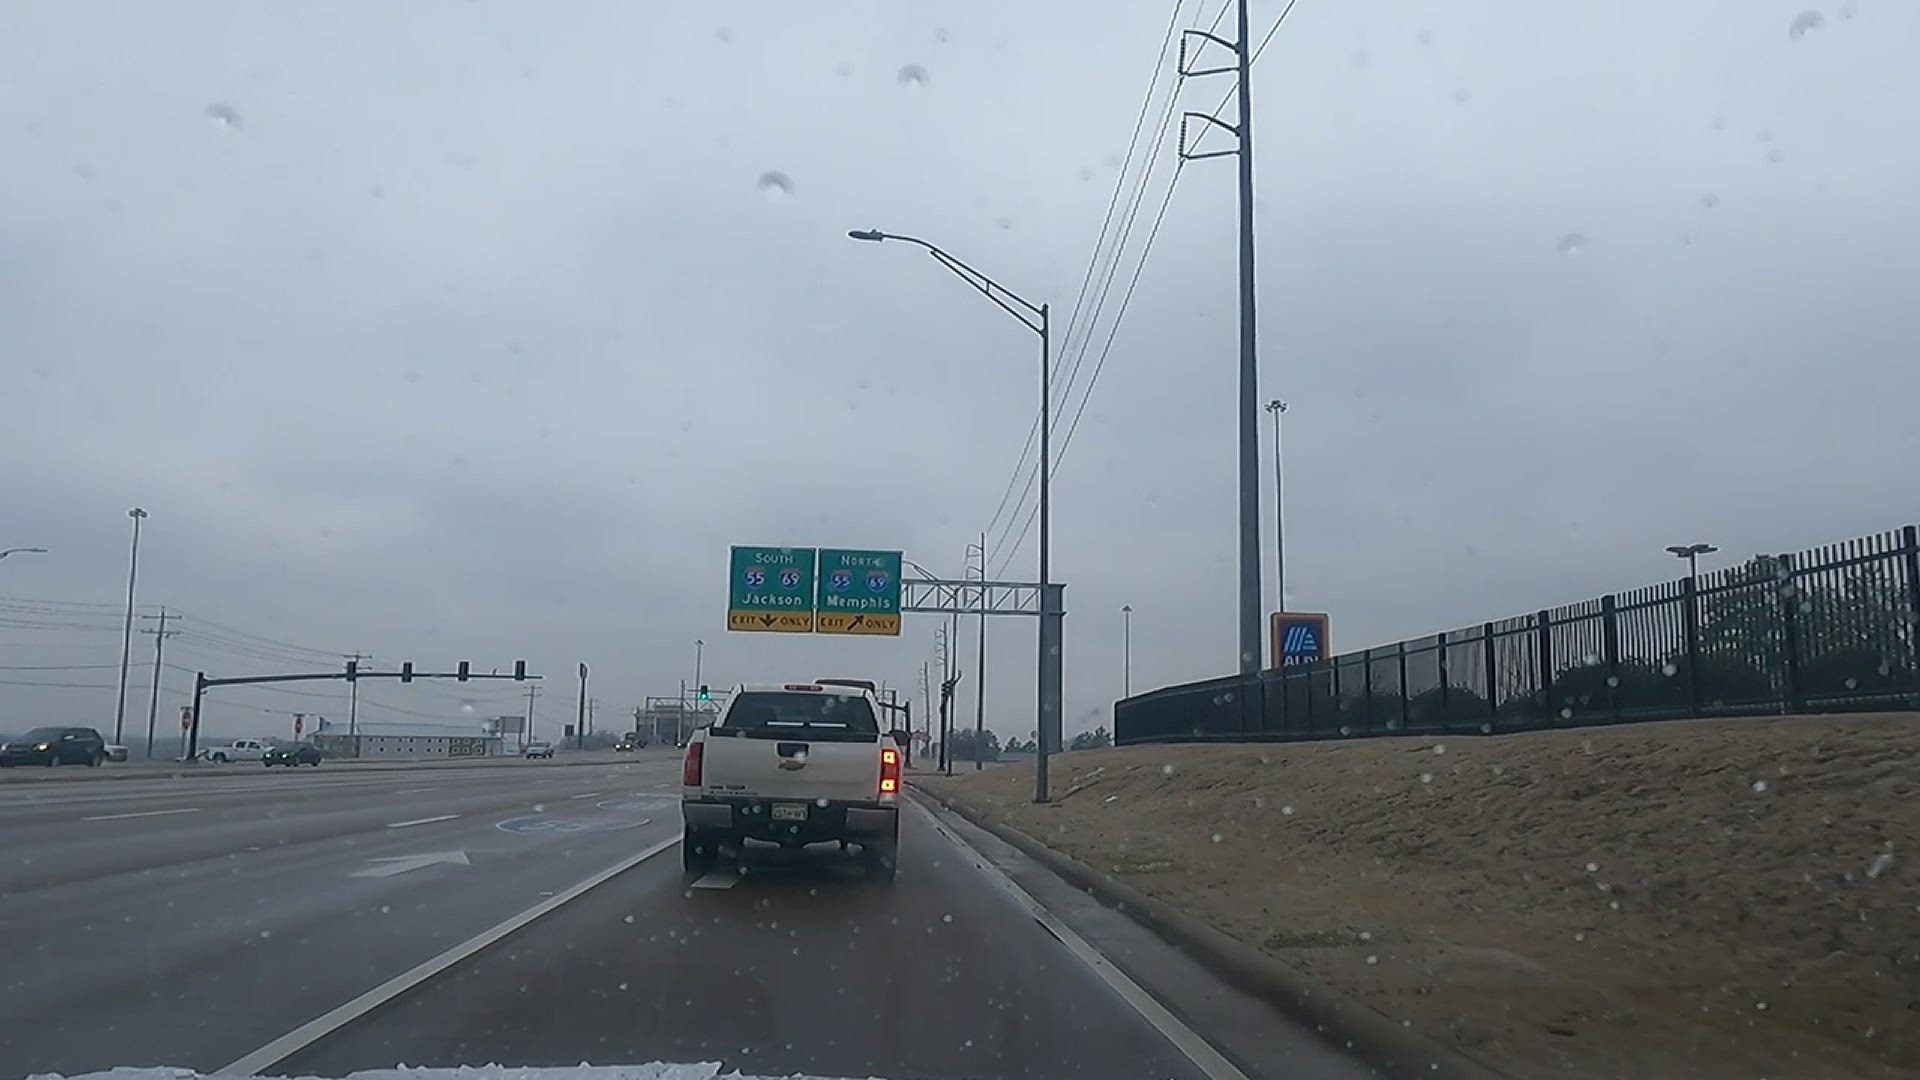 A Local 24 News Photographer got this dash camera video of road conditions Thursday morning along I-55 and I-240.